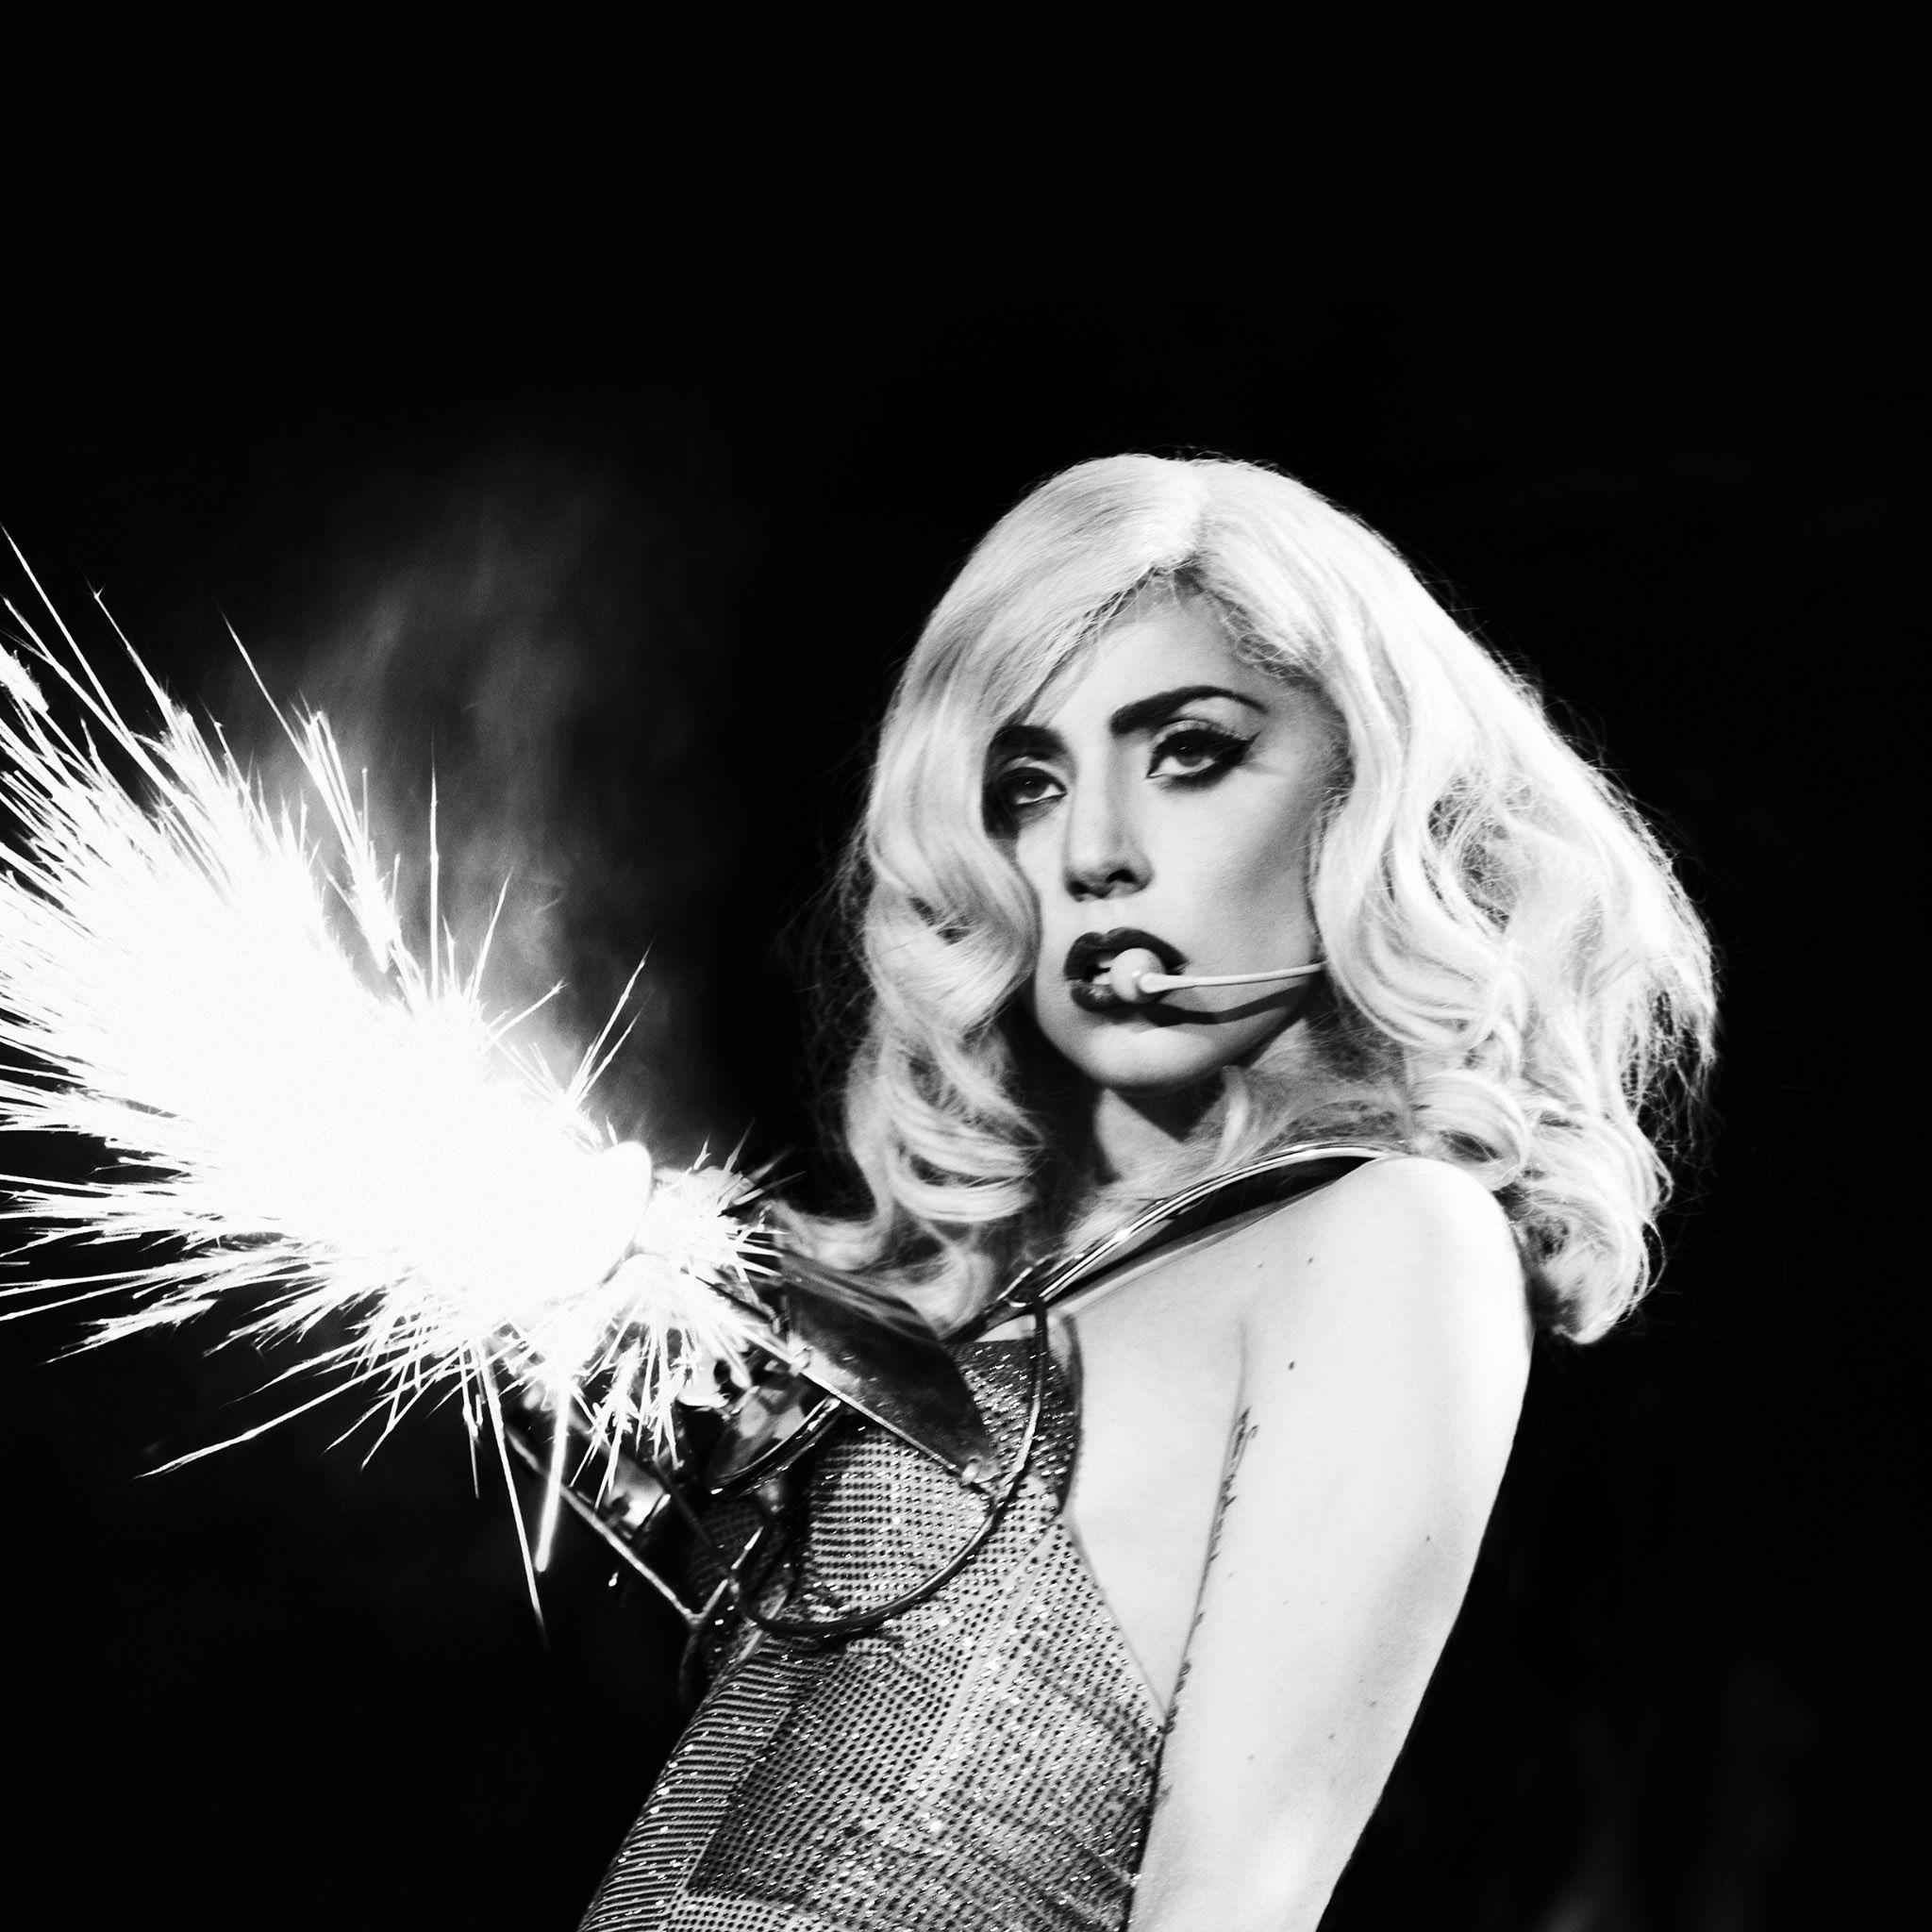  Aesthetic Lady Gaga Wallpapers Photos Pictures WhatsApp Status DP Free  Download